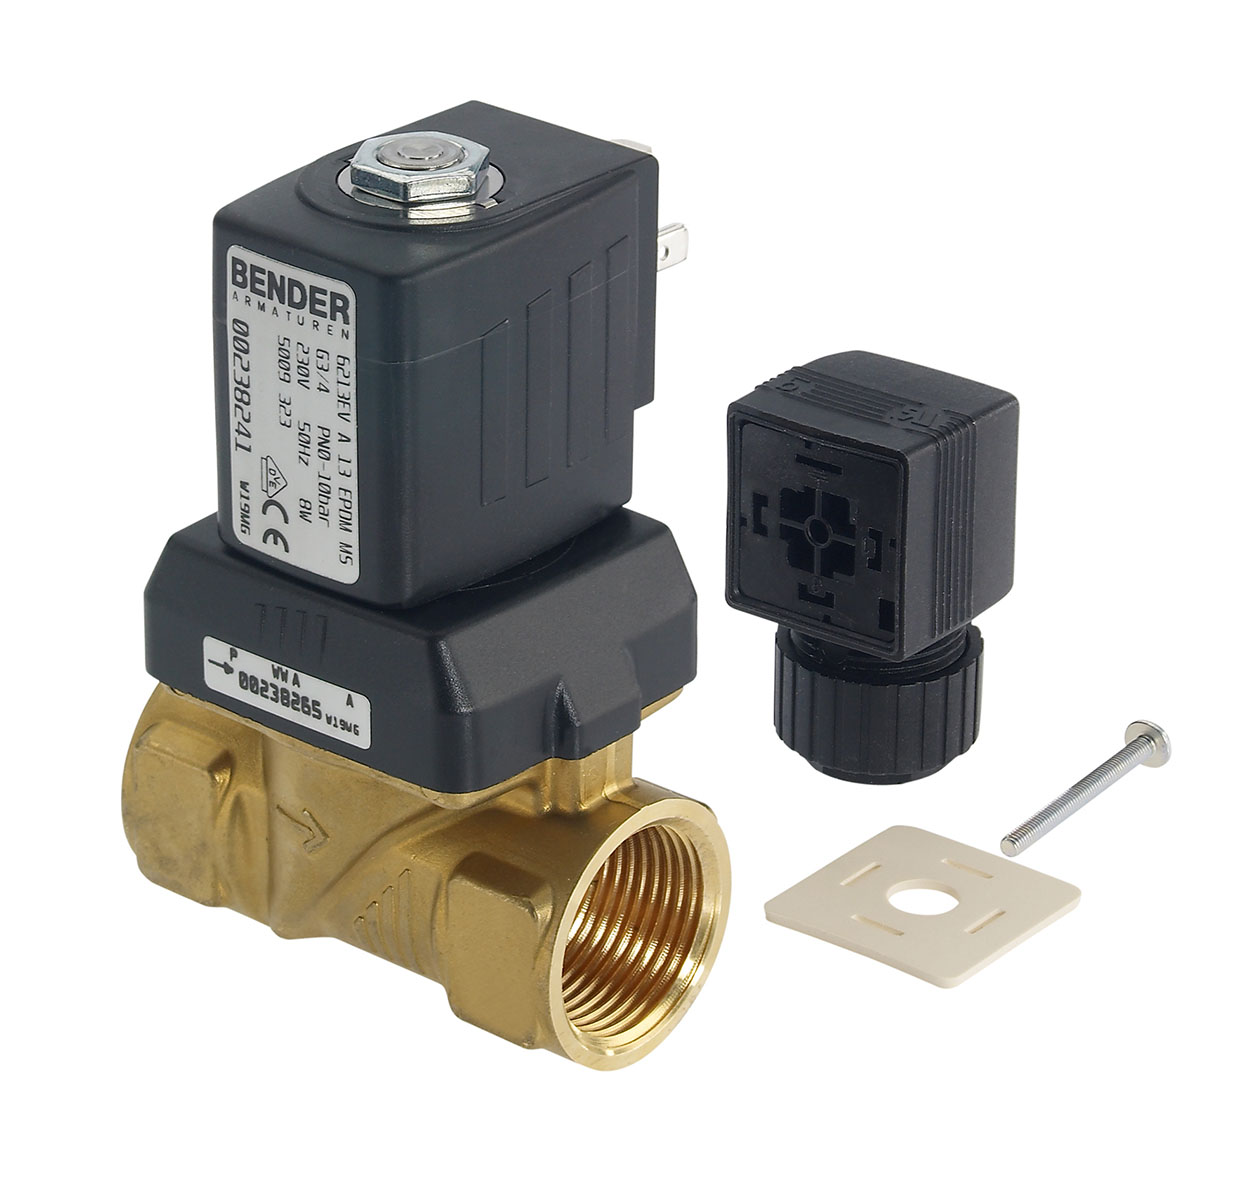 5009307 - 2/2 way solenoidvalve normally closed for fluids Type 1; female thread